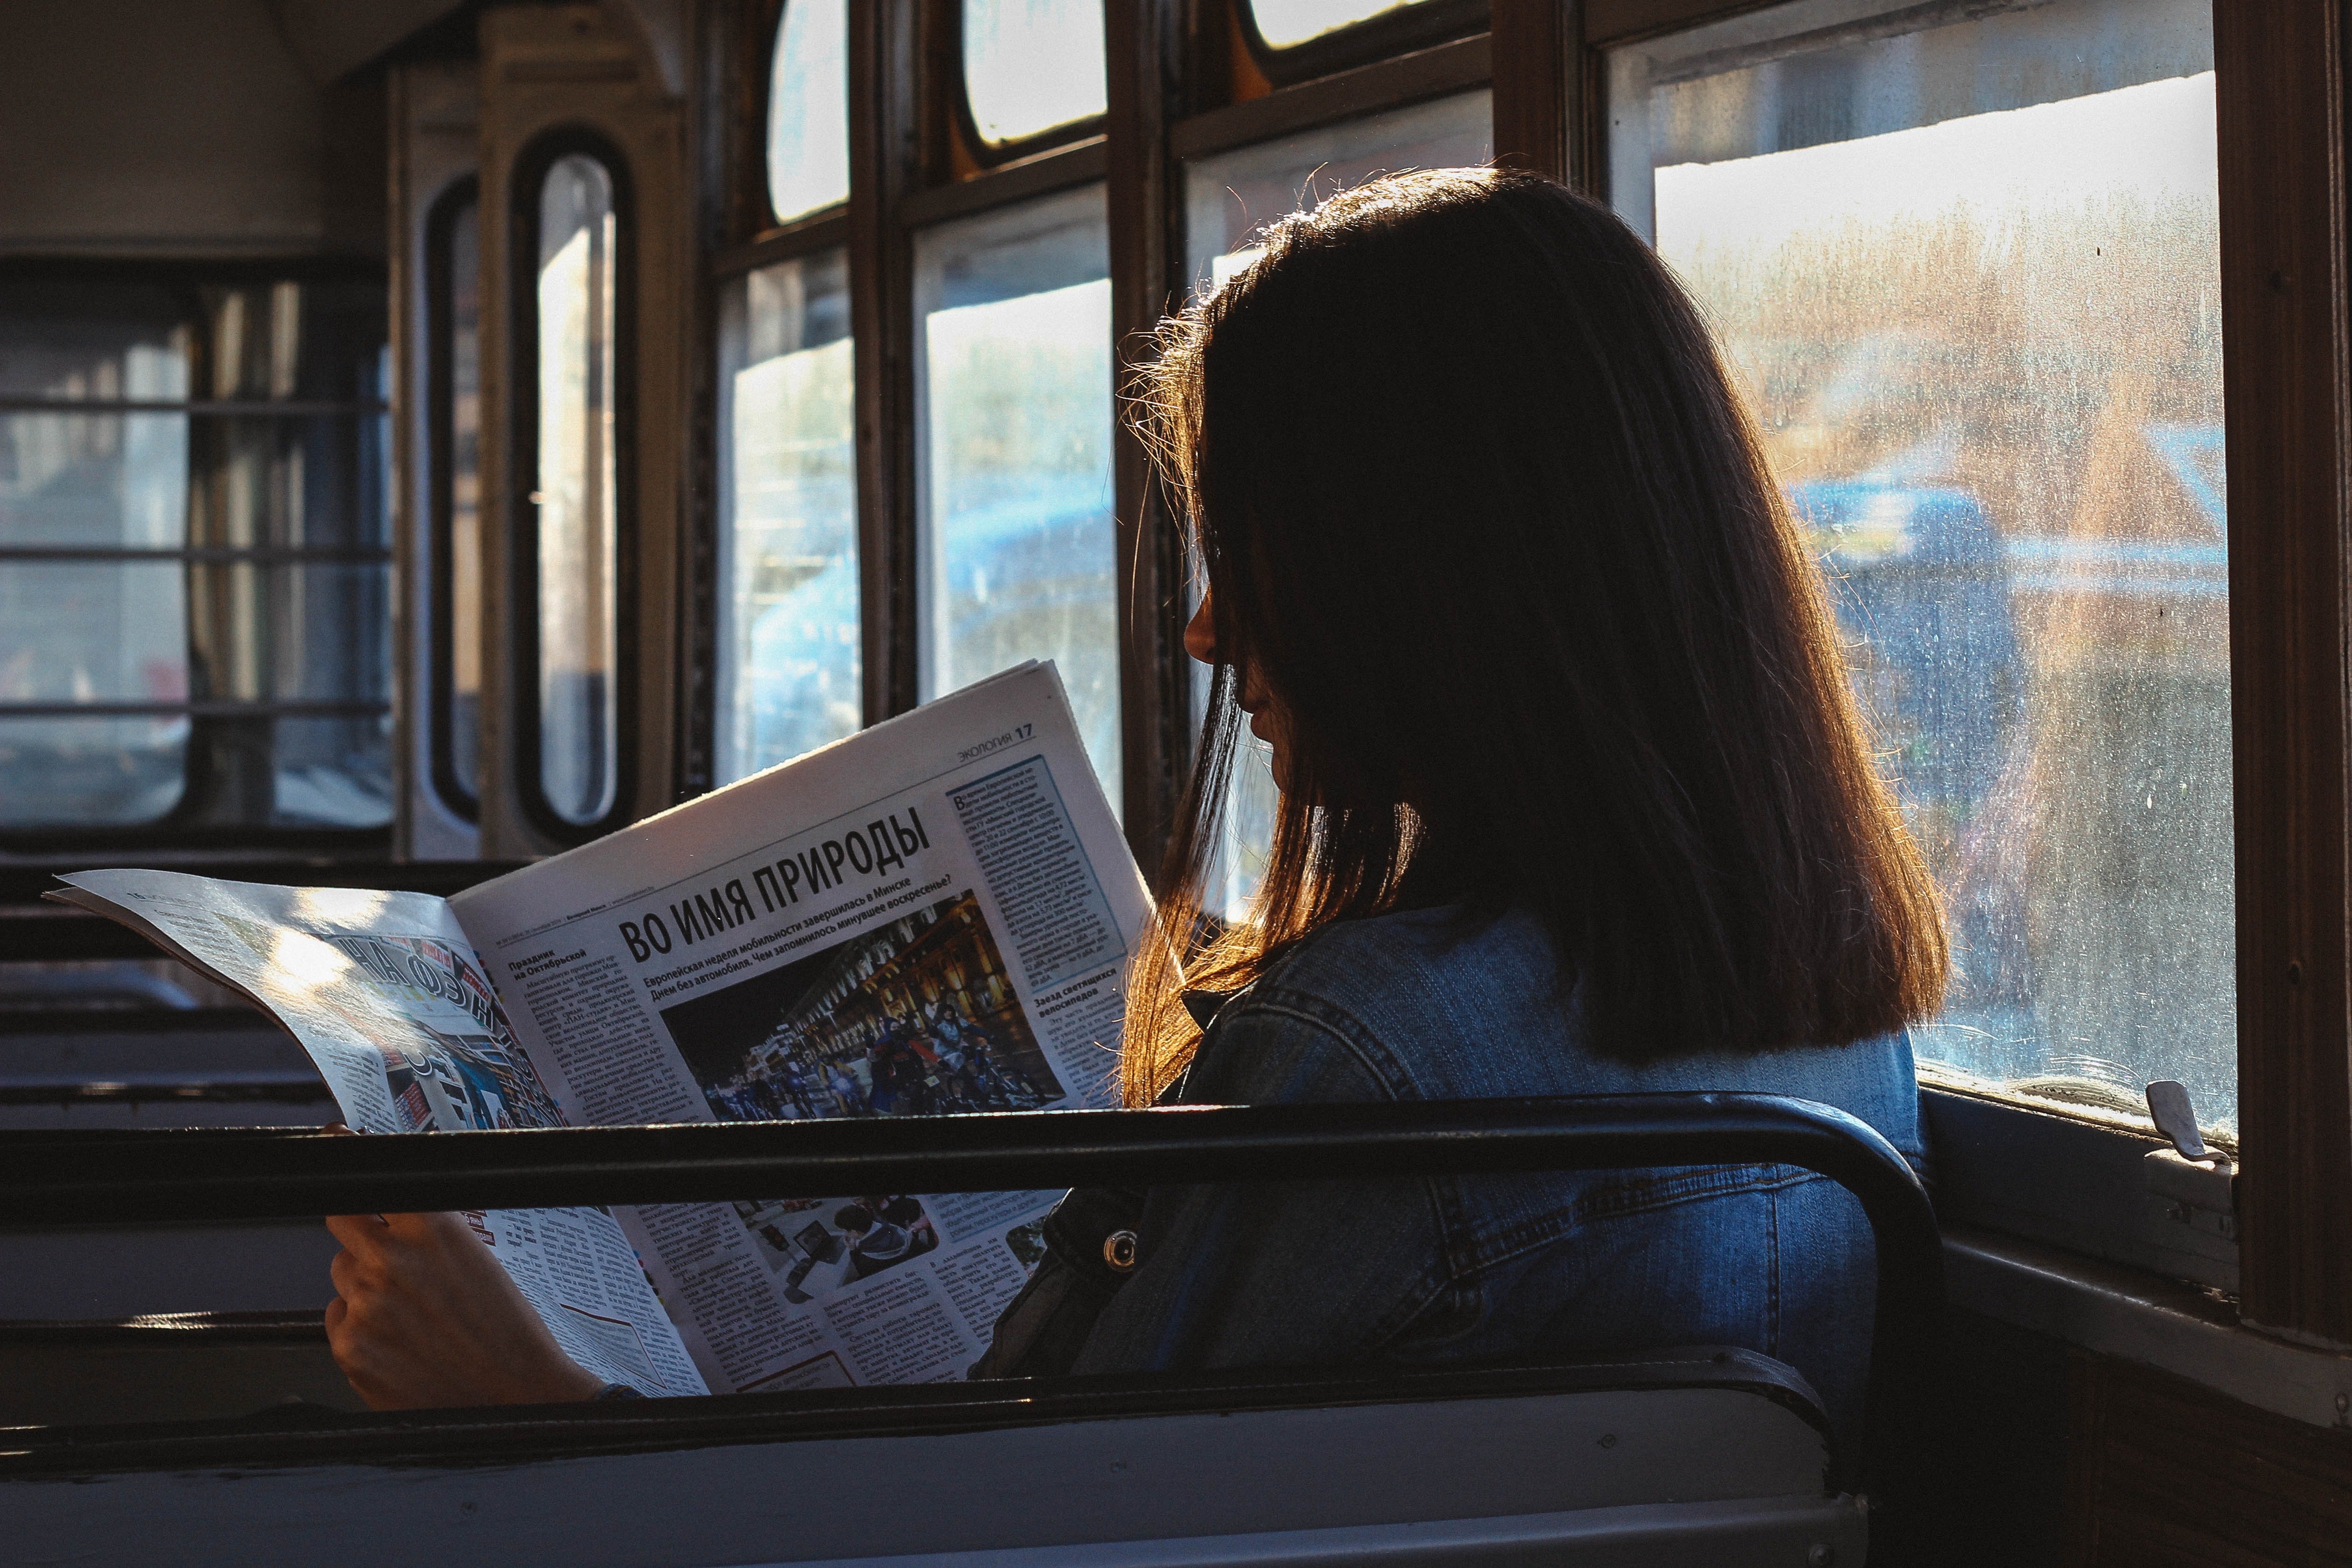 A woman reading a newspaper inside a bus | Photo: Pexels